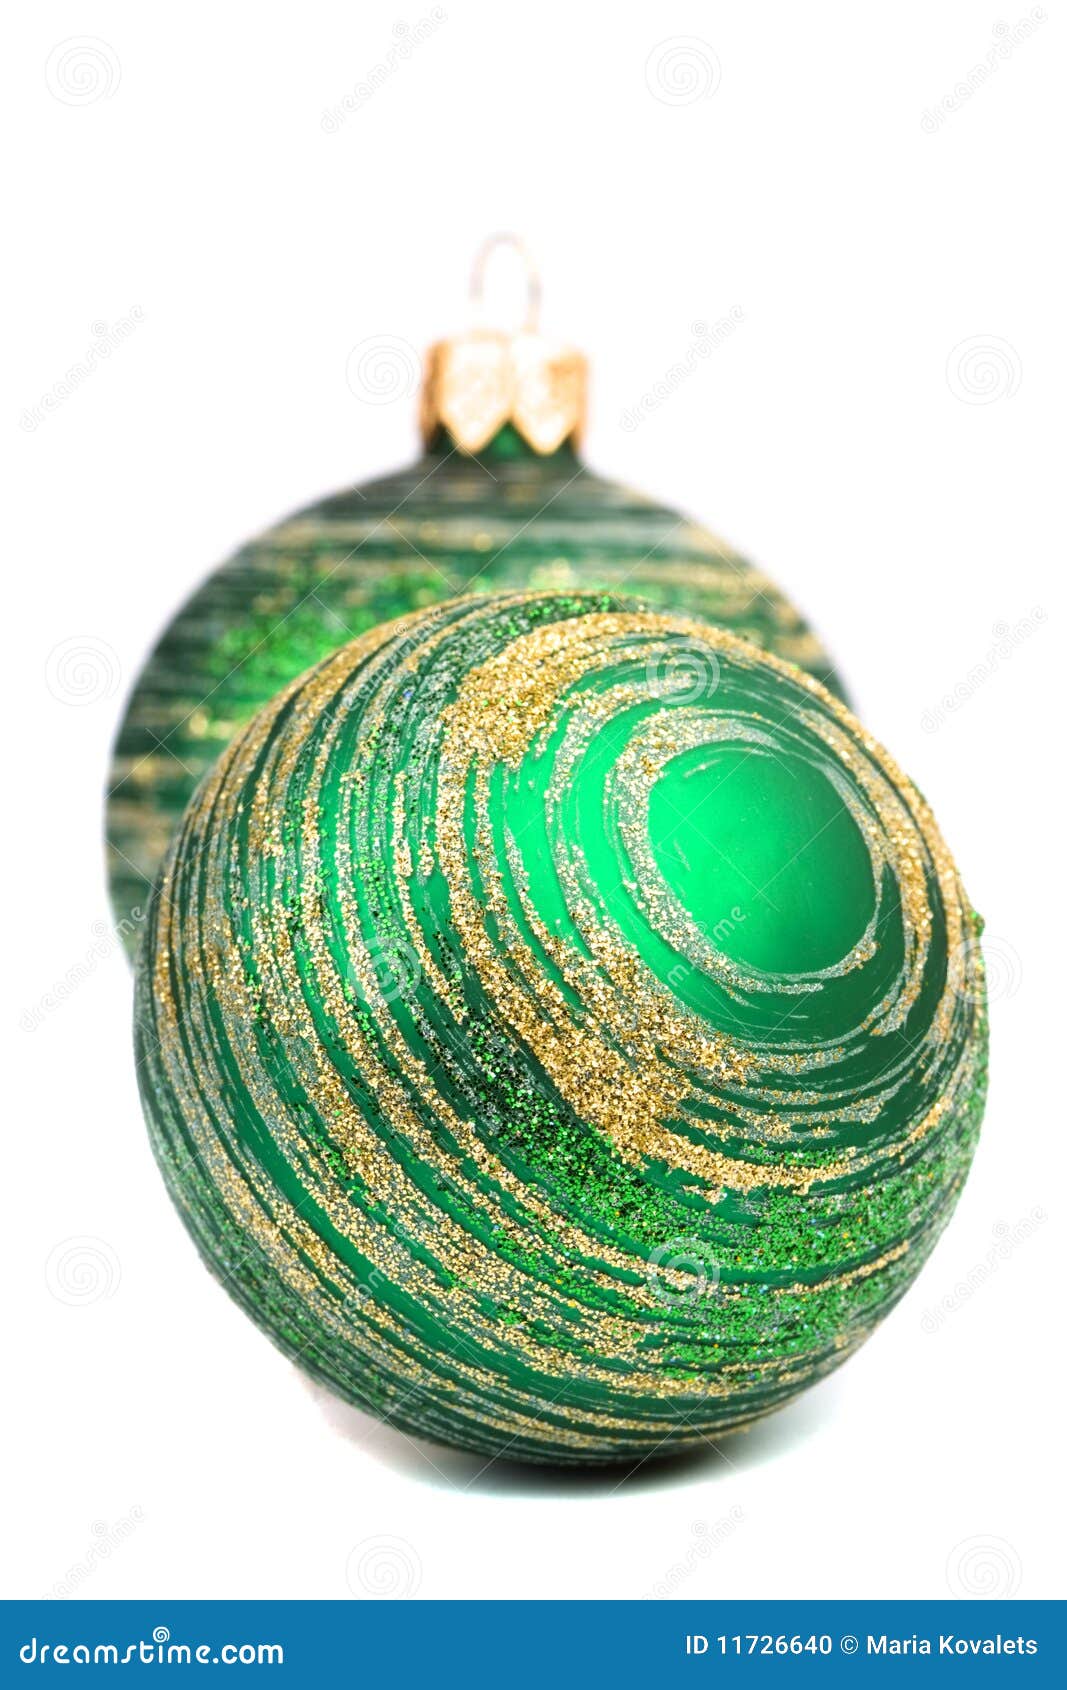 Two green christmas balls stock photo. Image of decoration - 11726640